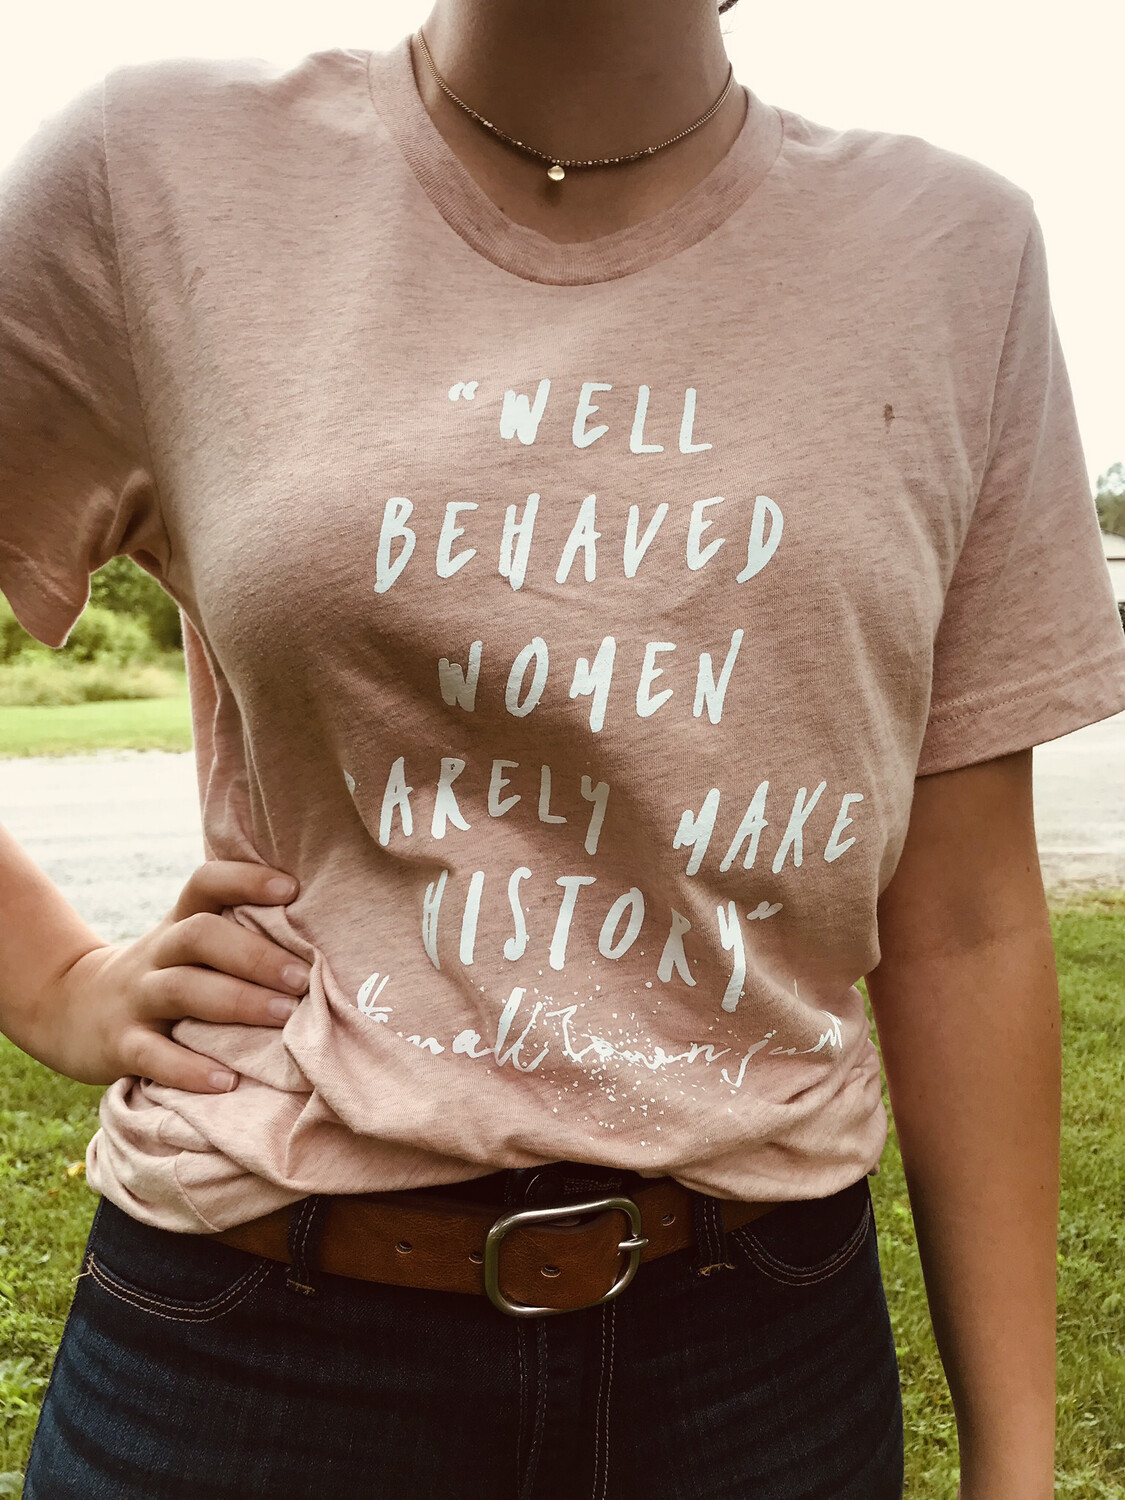 “Well Behaved Women Rarely Make History”